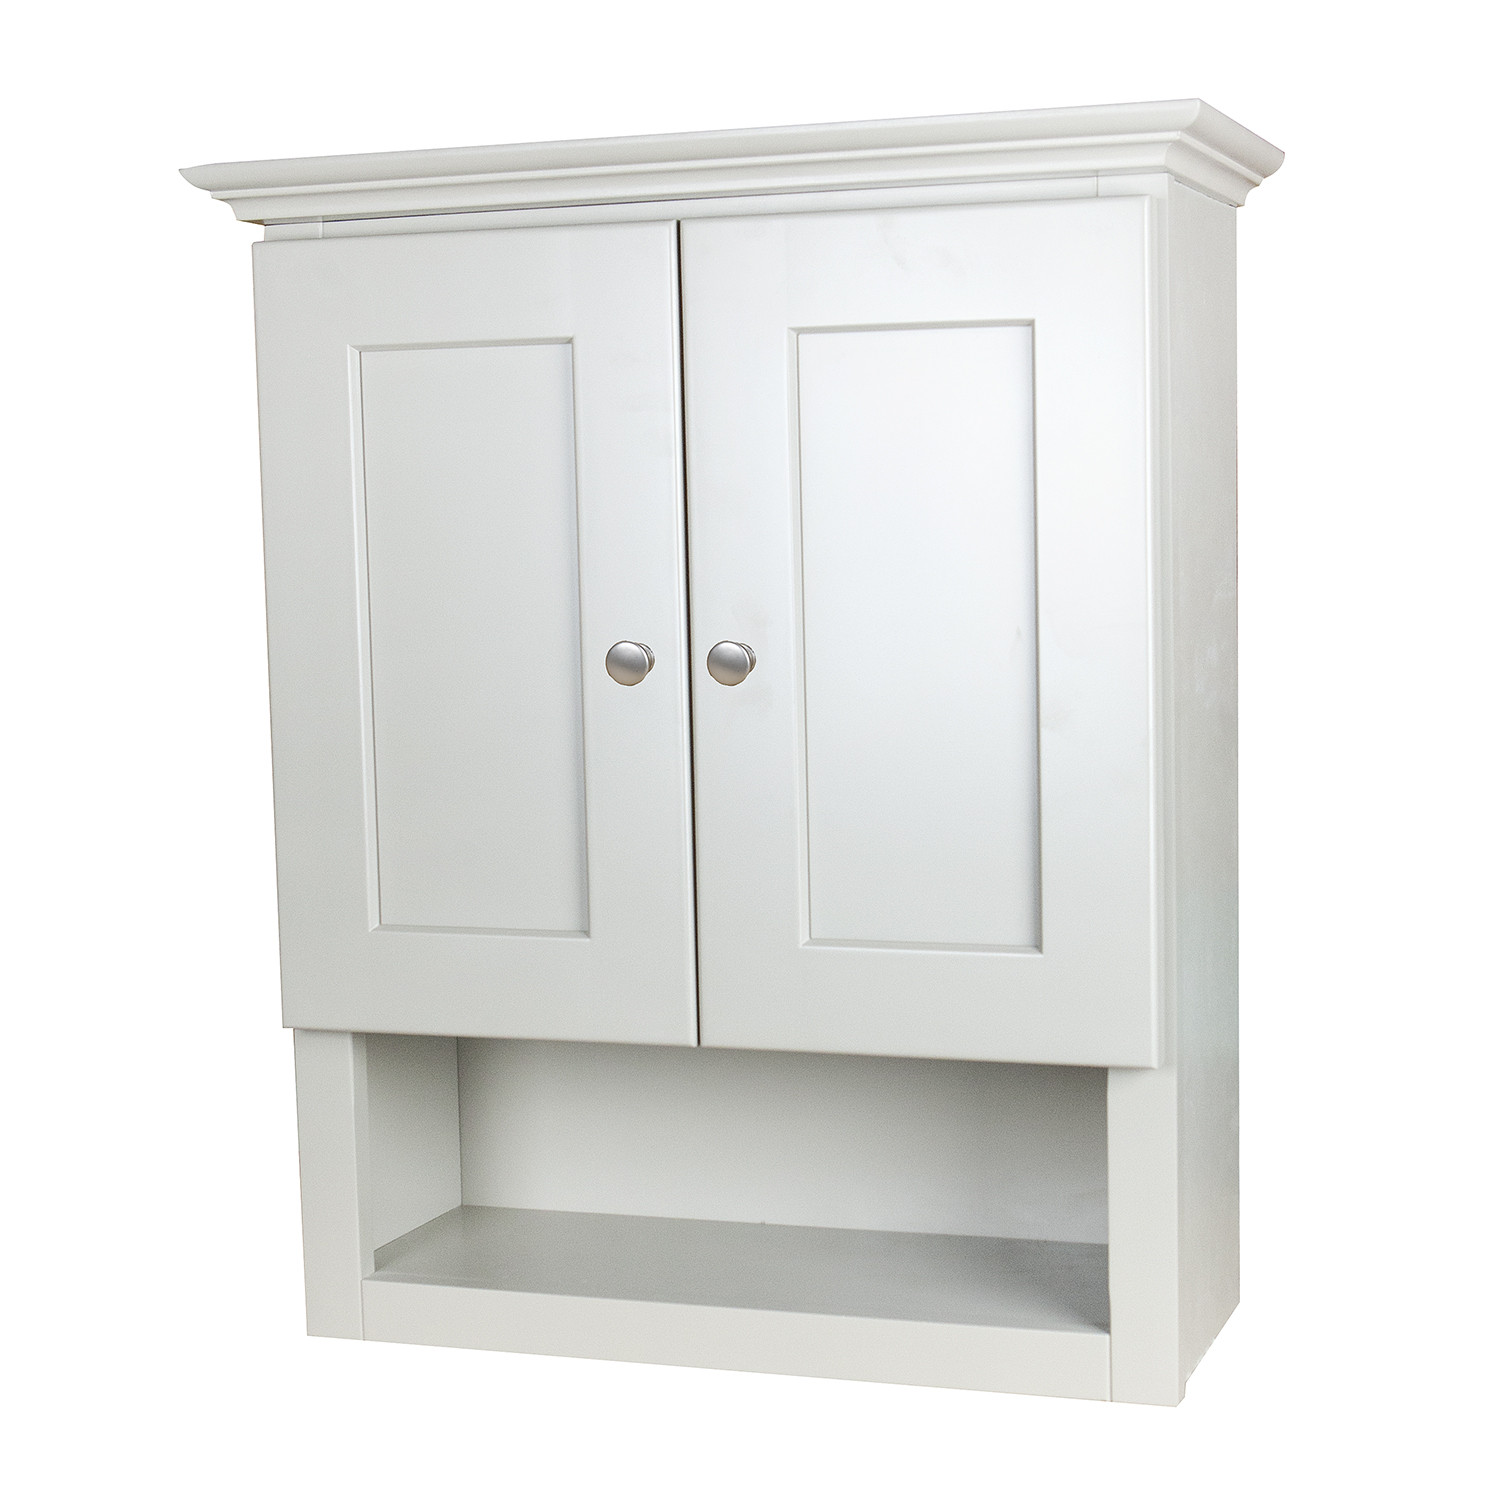 Small Bathroom Wall Cabinets
 White Shaker Bathroom Wall Cabinet with 2 shelves